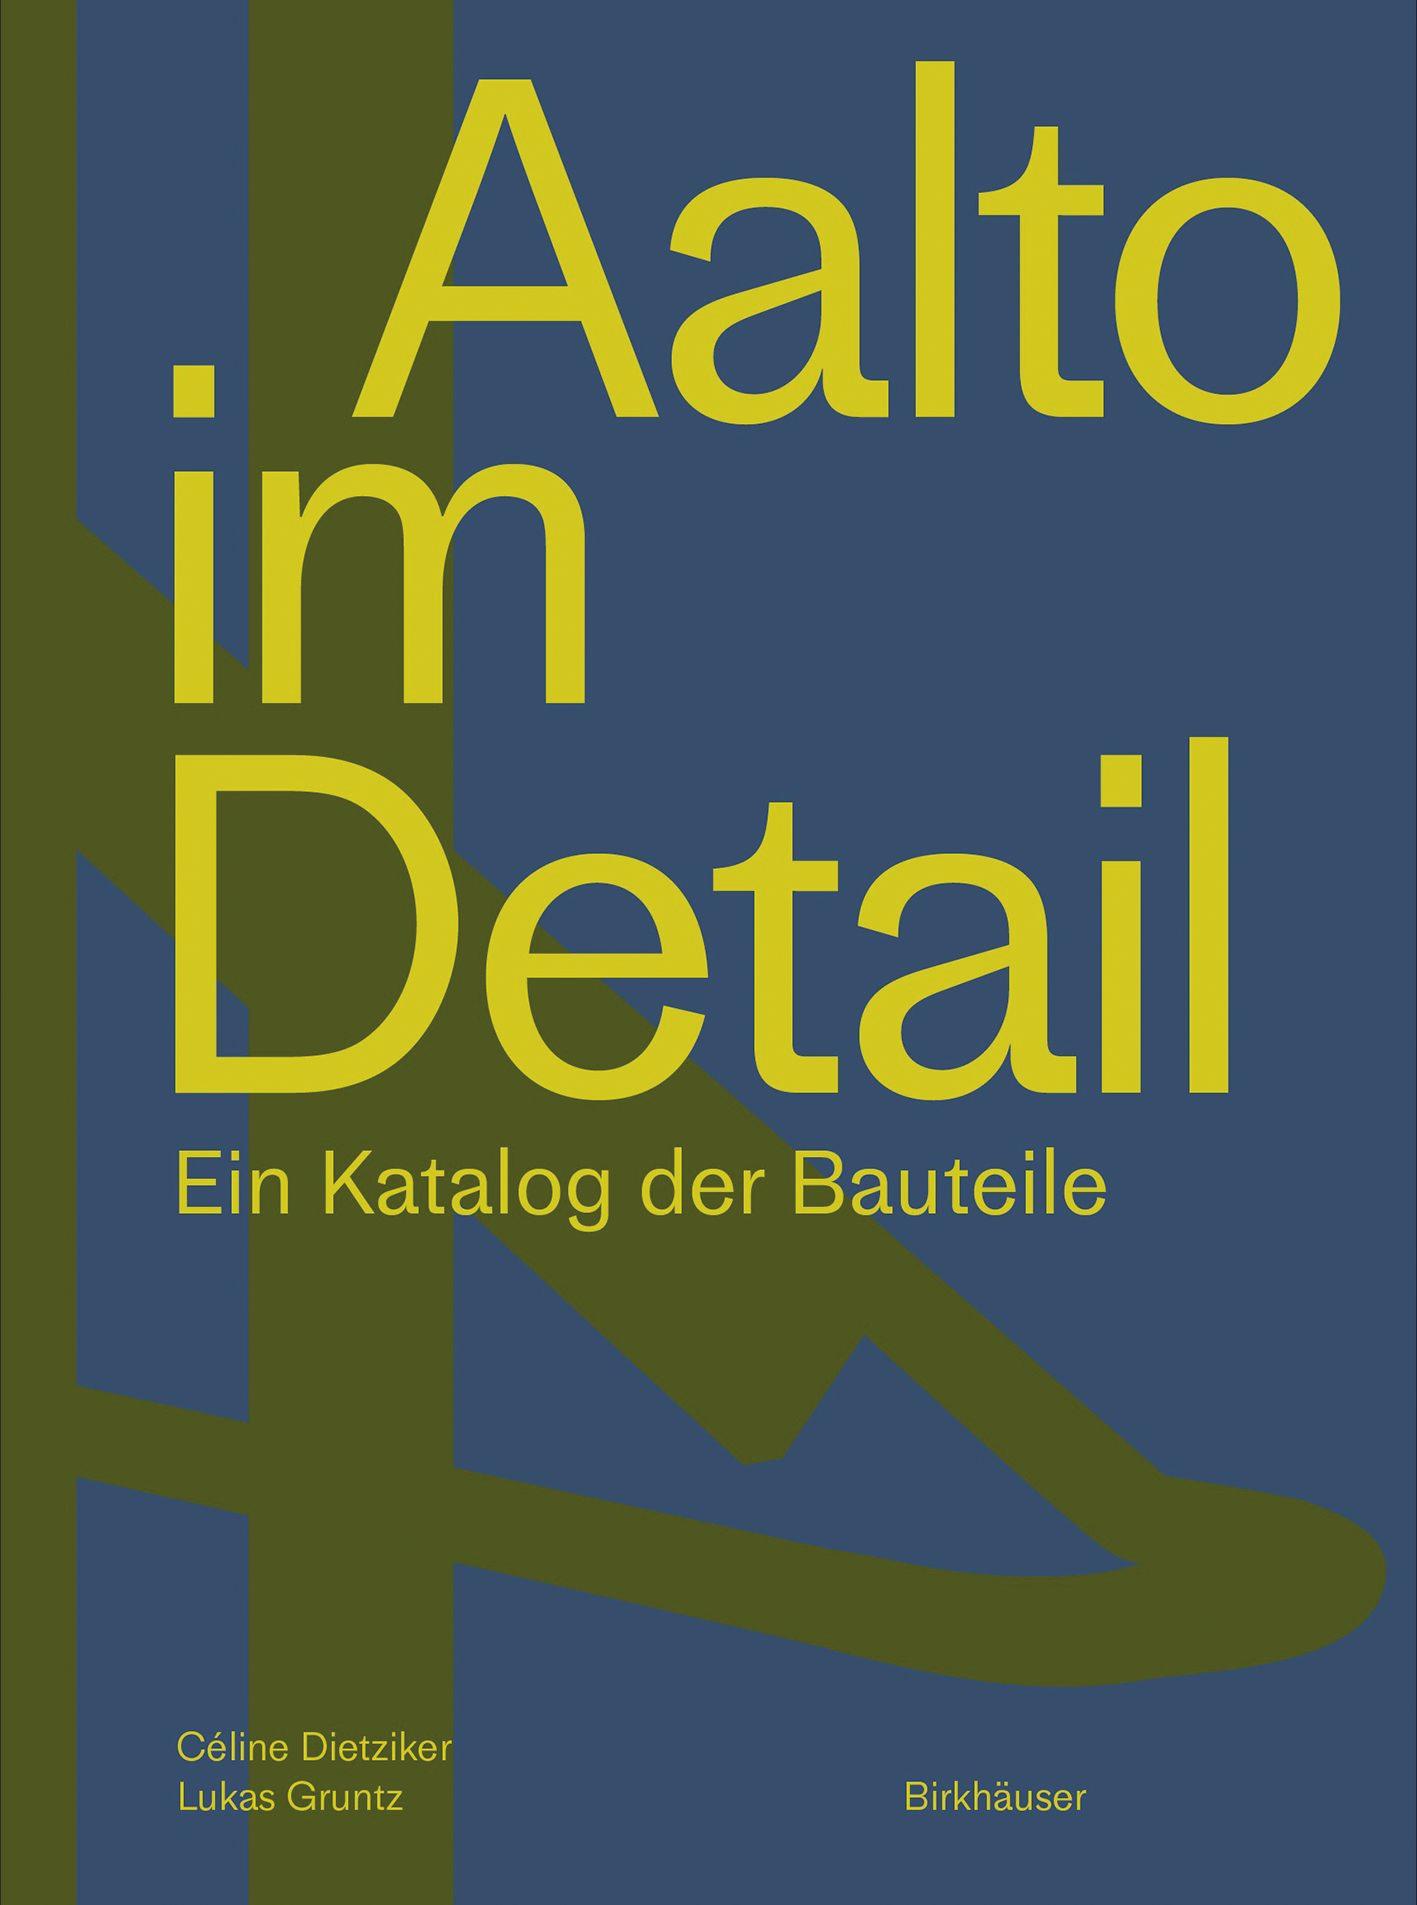 Aalto im Detail's cover